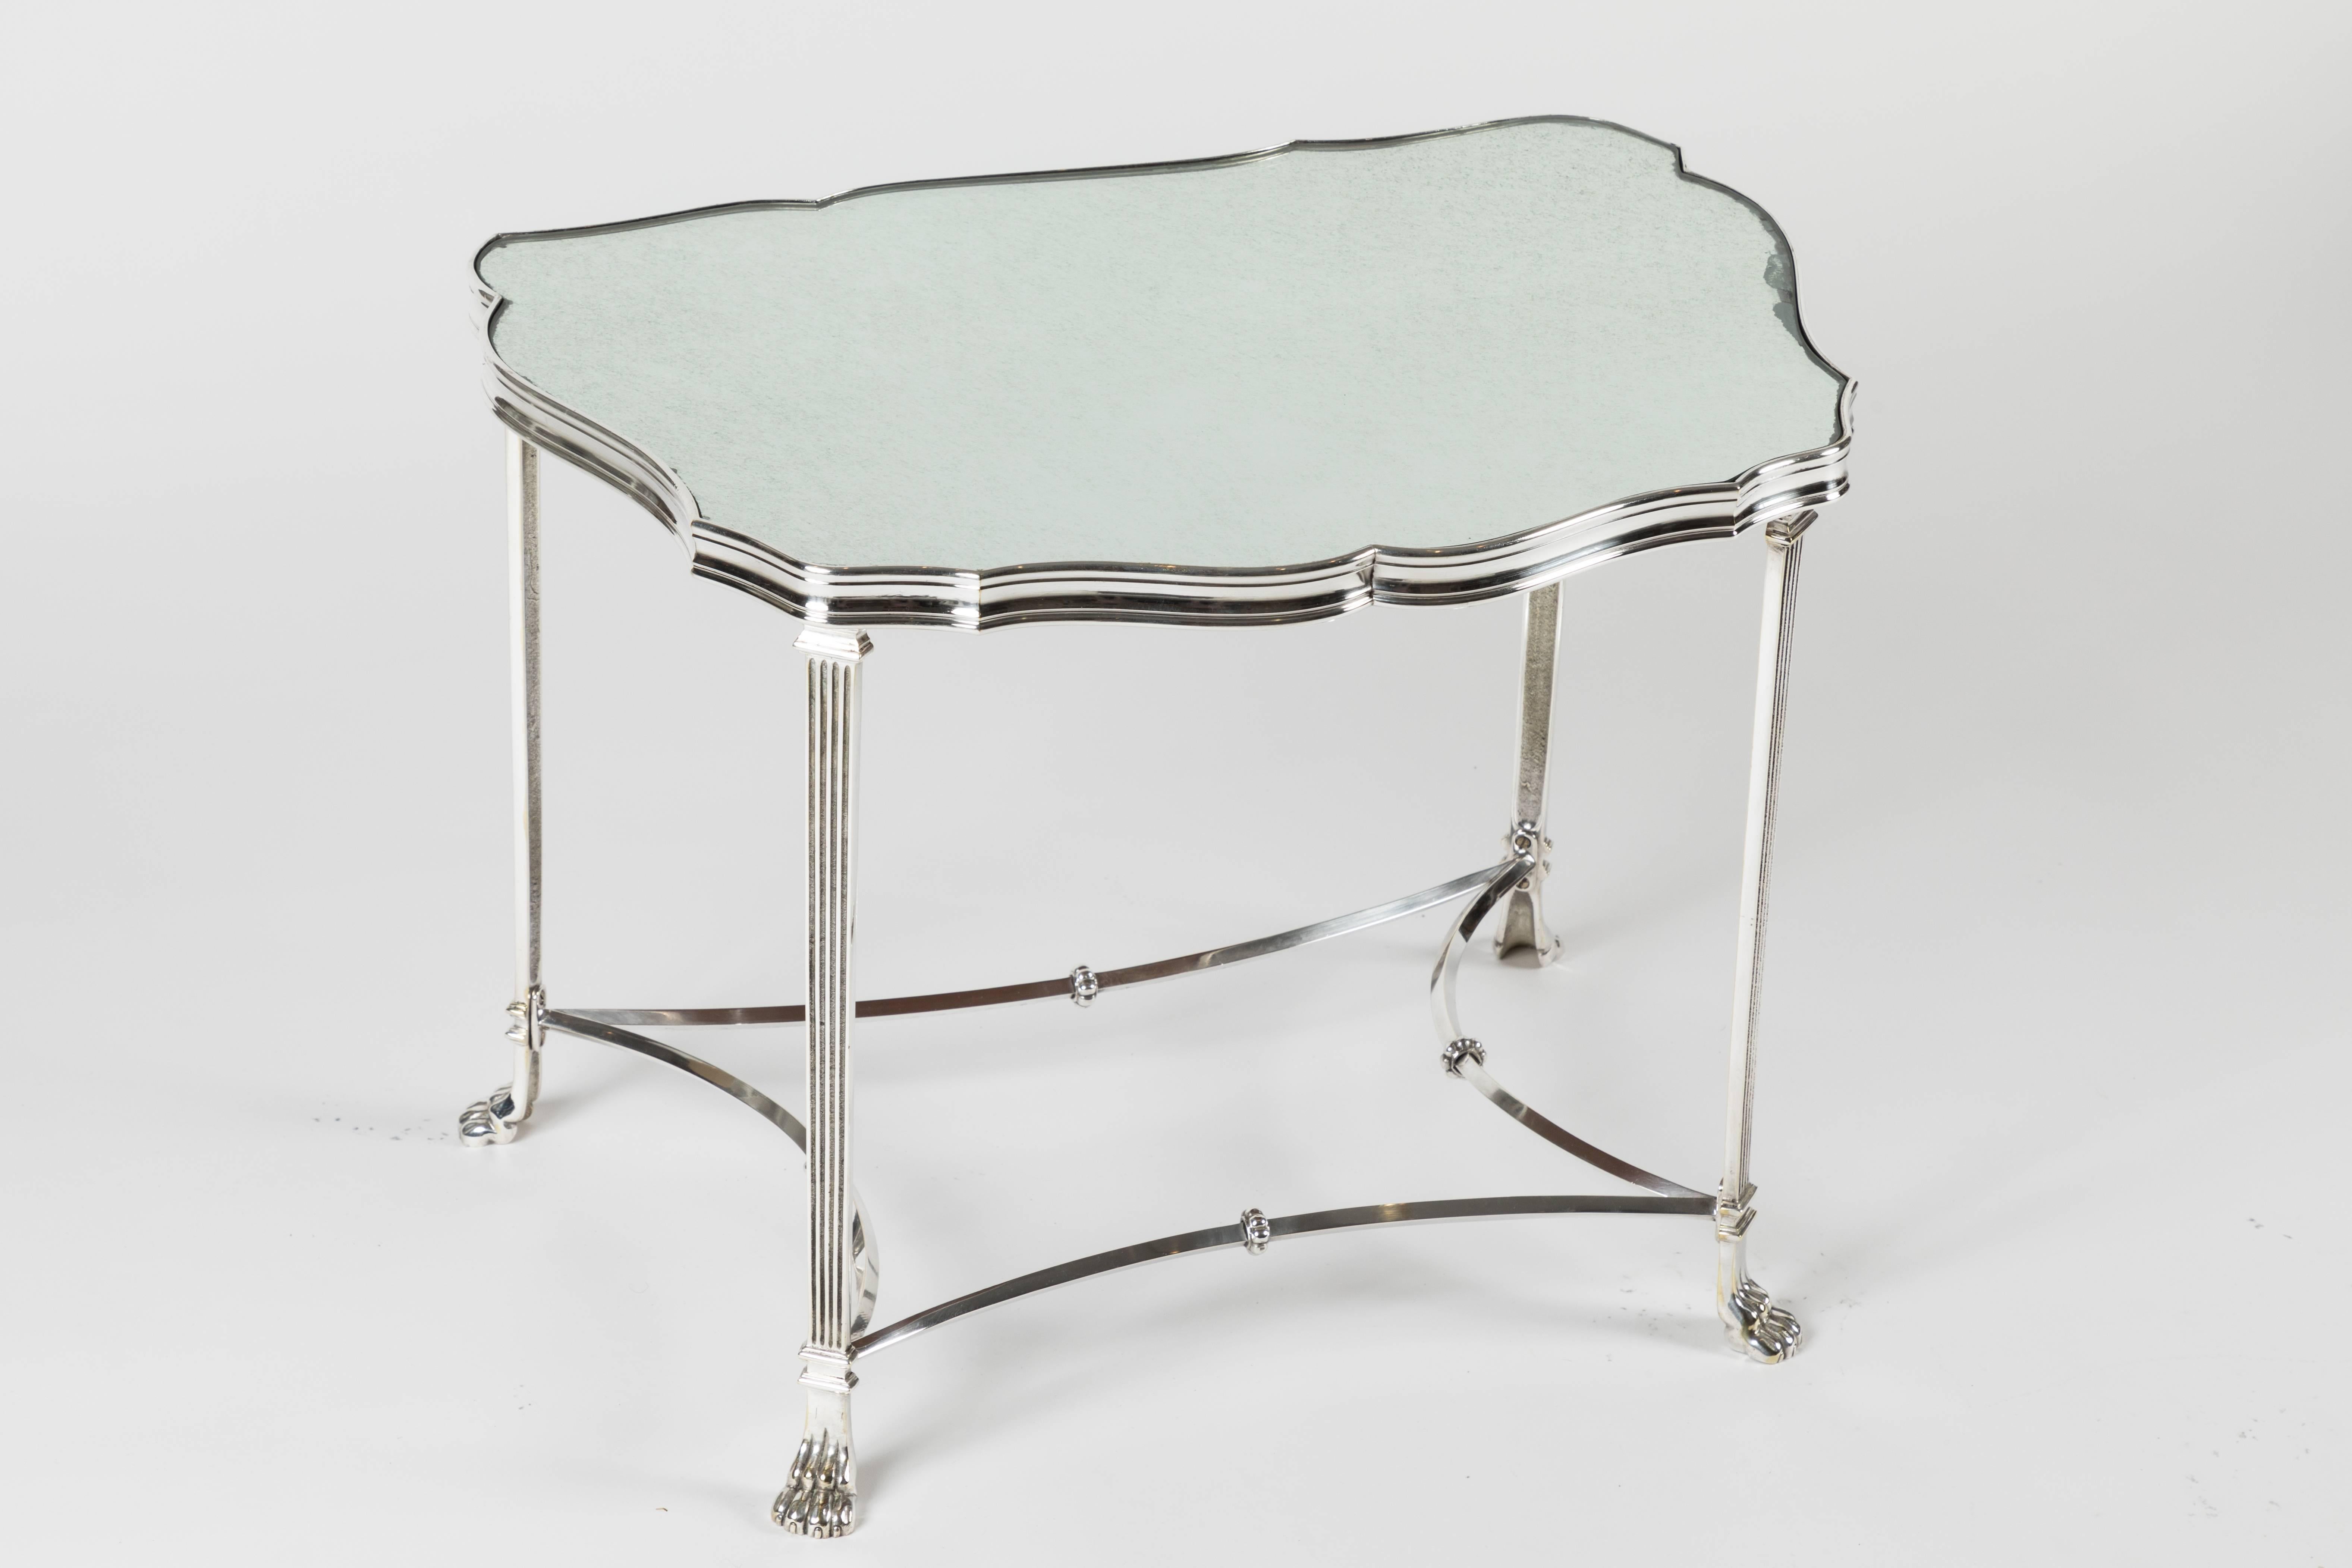 A beautiful pair of side tables with frames that terminate in claw feet and are finished in silver plate. Very reminiscent of Maison Jansen, the unusual shape is mirrored in the opposite table as they are a matched pair. The tables have 